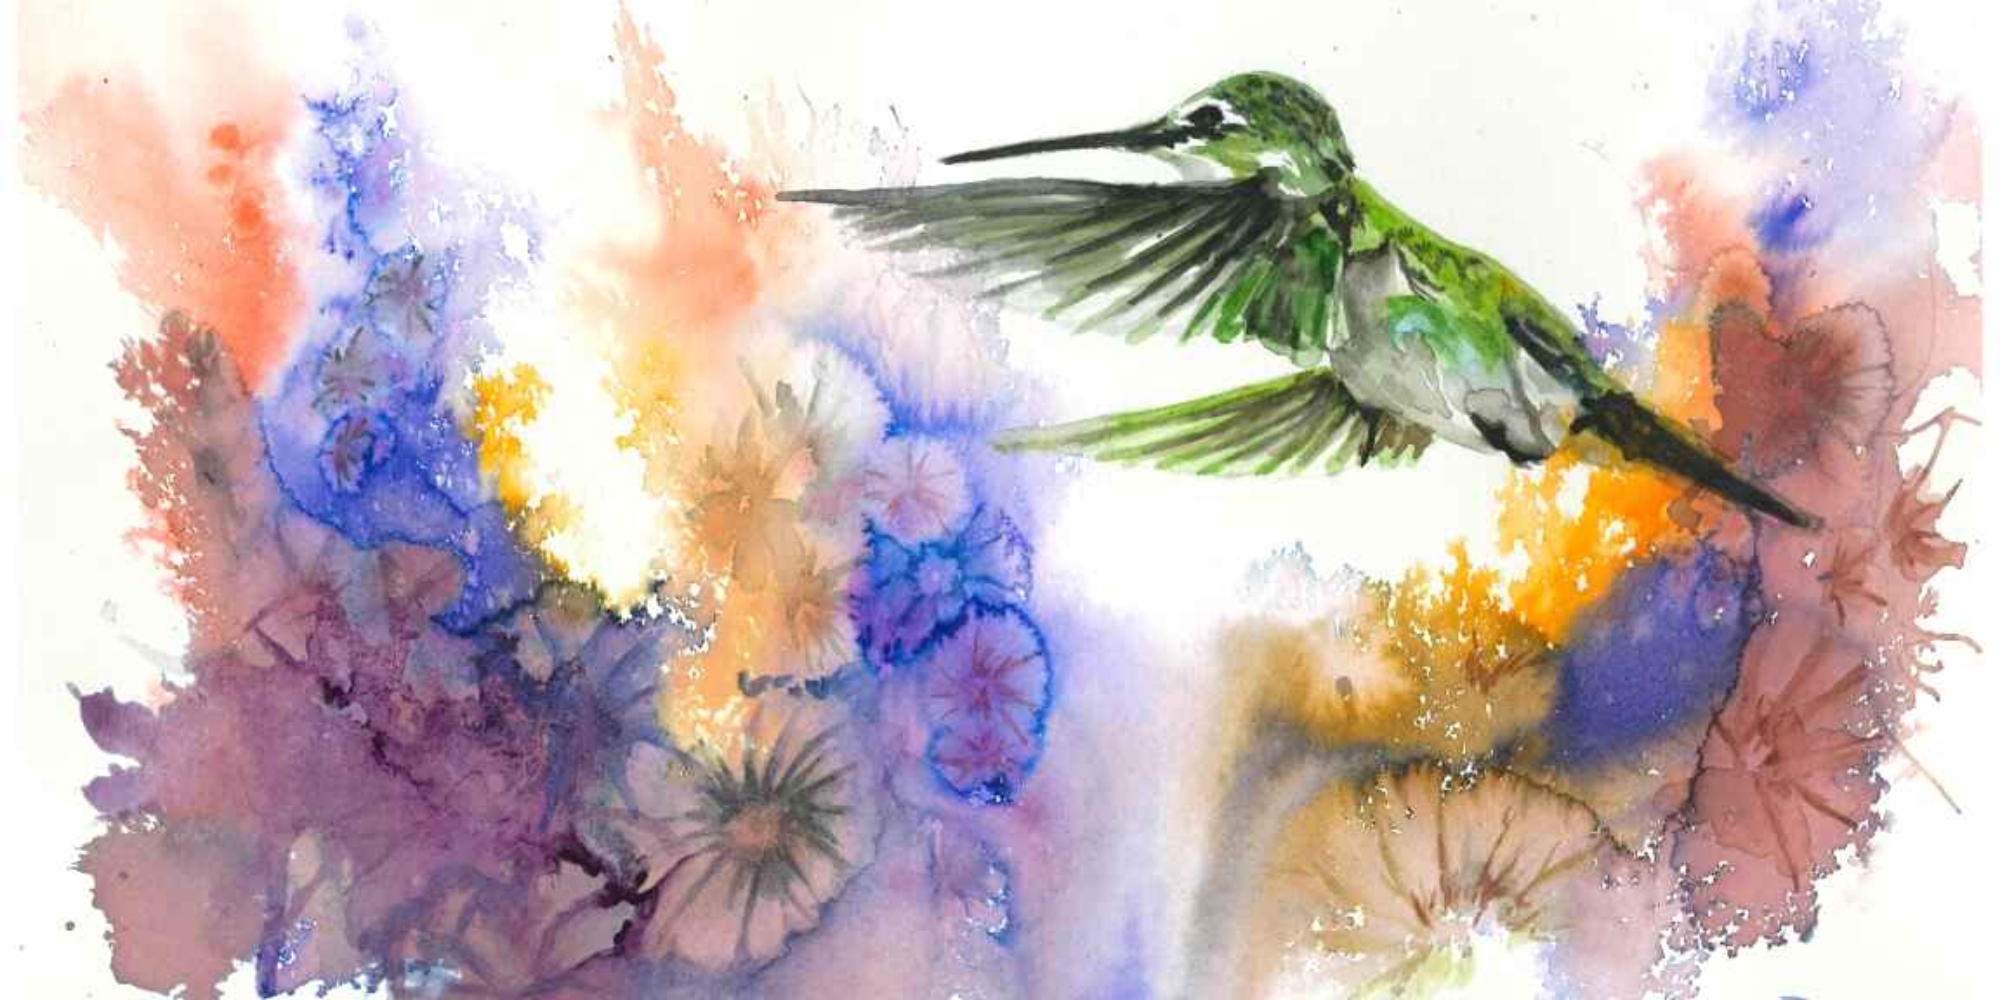 "Flight of Fancy"
 9x12 watercolor available as an original or as a matted print.